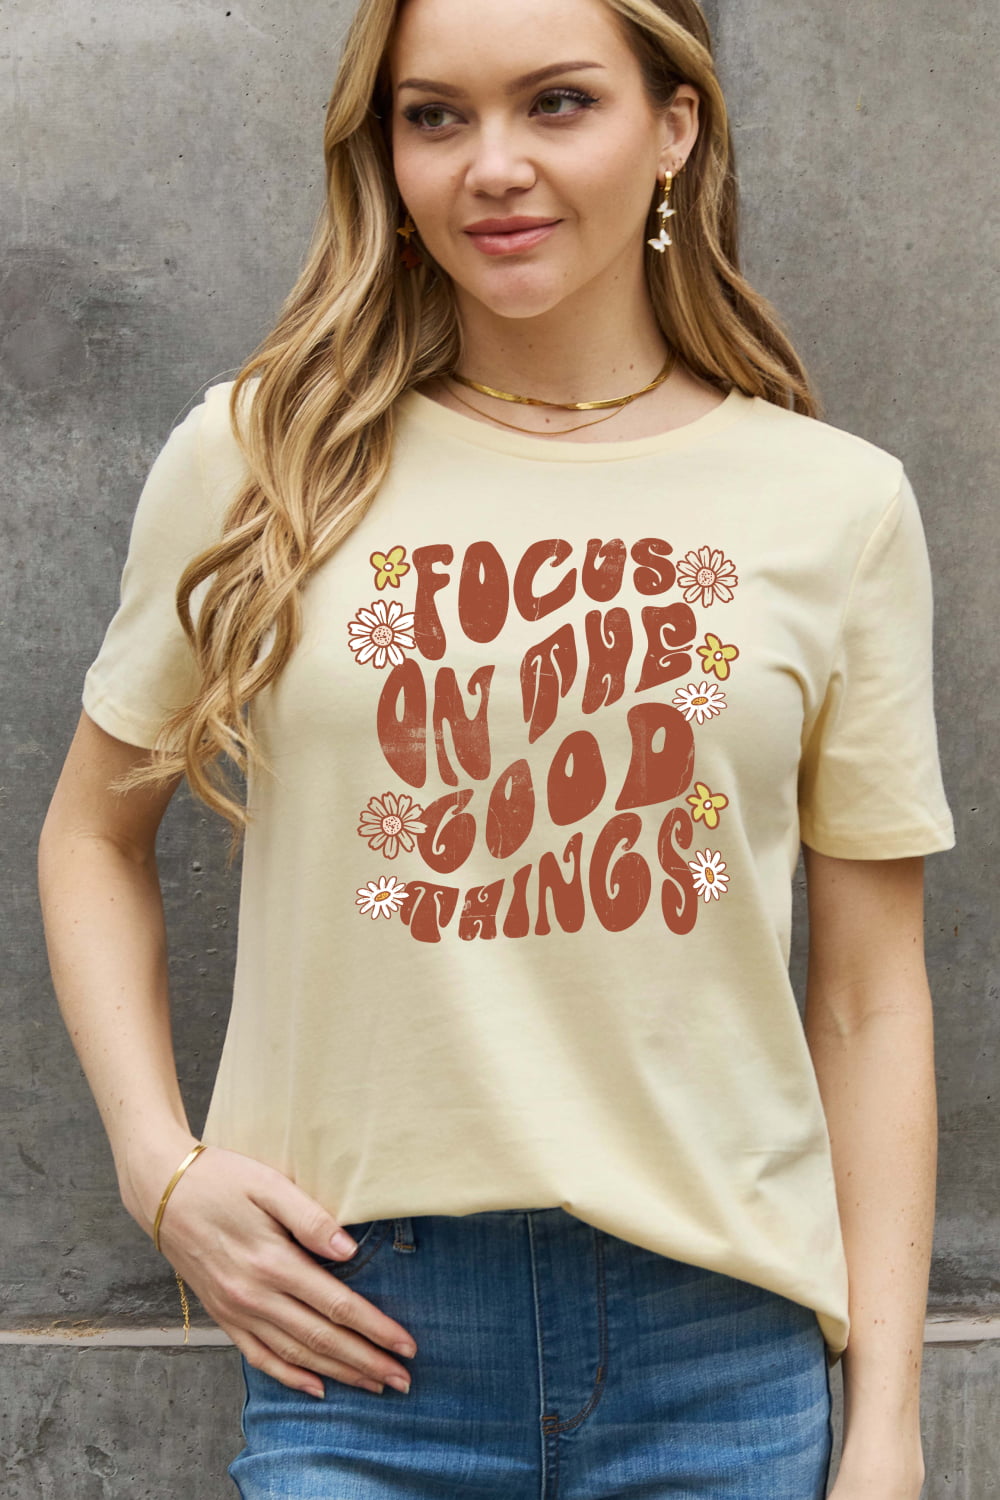 FOCUS ON THE GOOD THINGS Graphic Cotton Tee - Beige / S - T-Shirts - Shirts & Tops - 7 - 2024